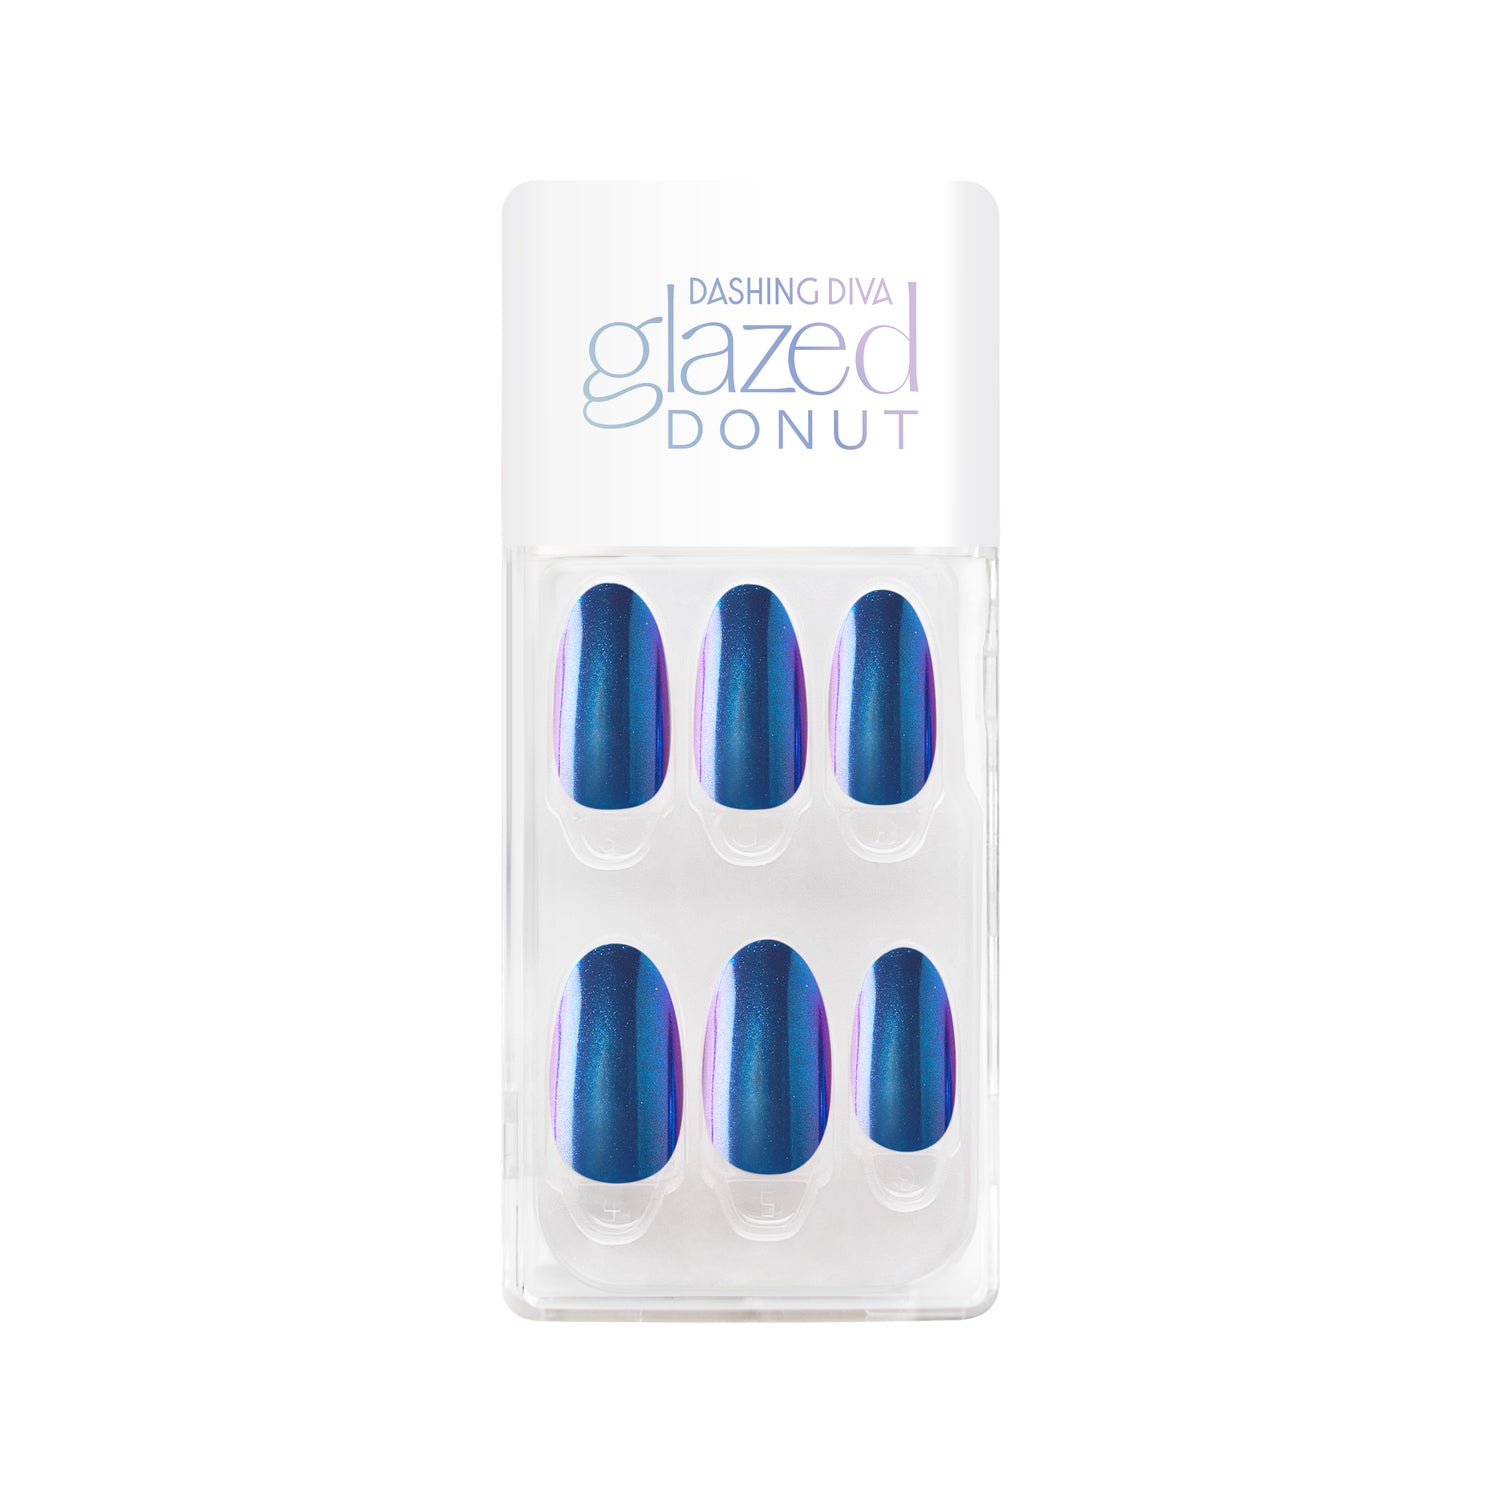  Reflective blue press-on gel nails featuring a medium-length, almond shape, with a metallic chrome finish.